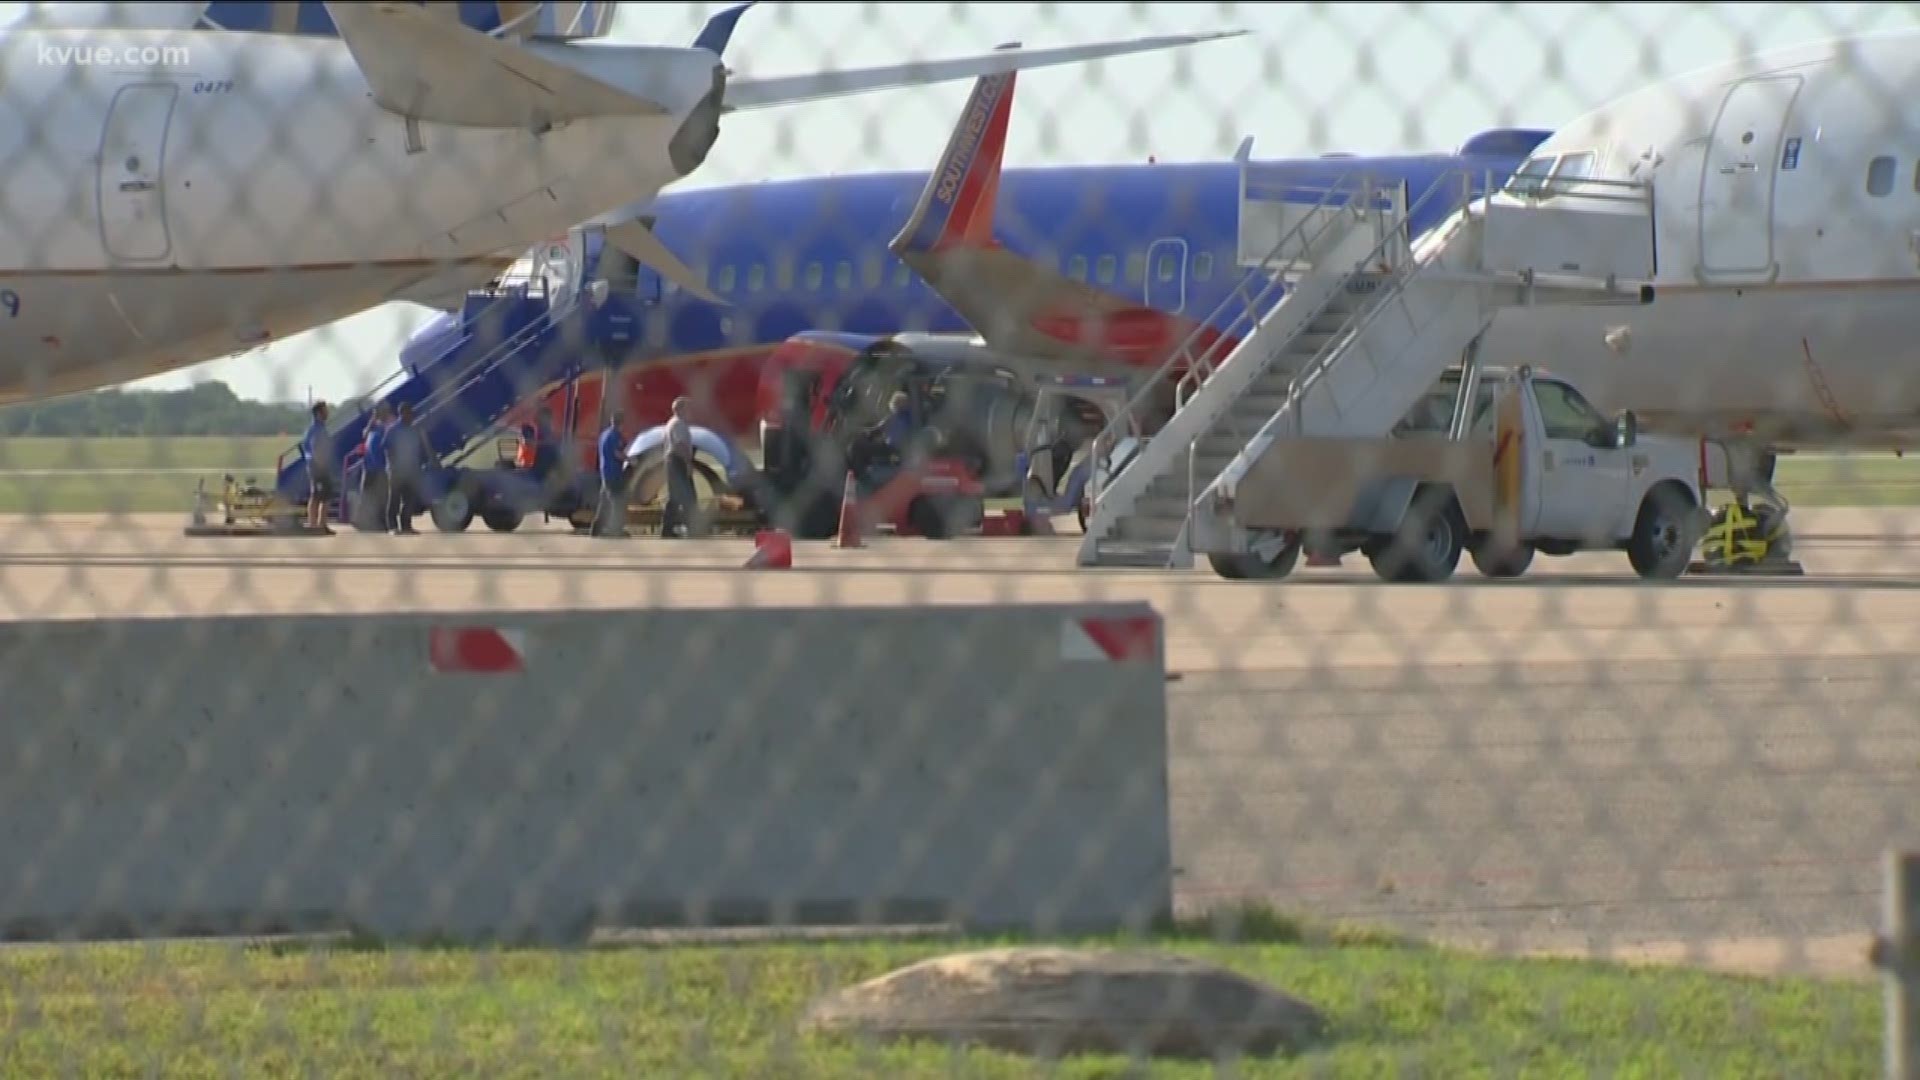 Officials have said the person was not authorized to be on the runway.